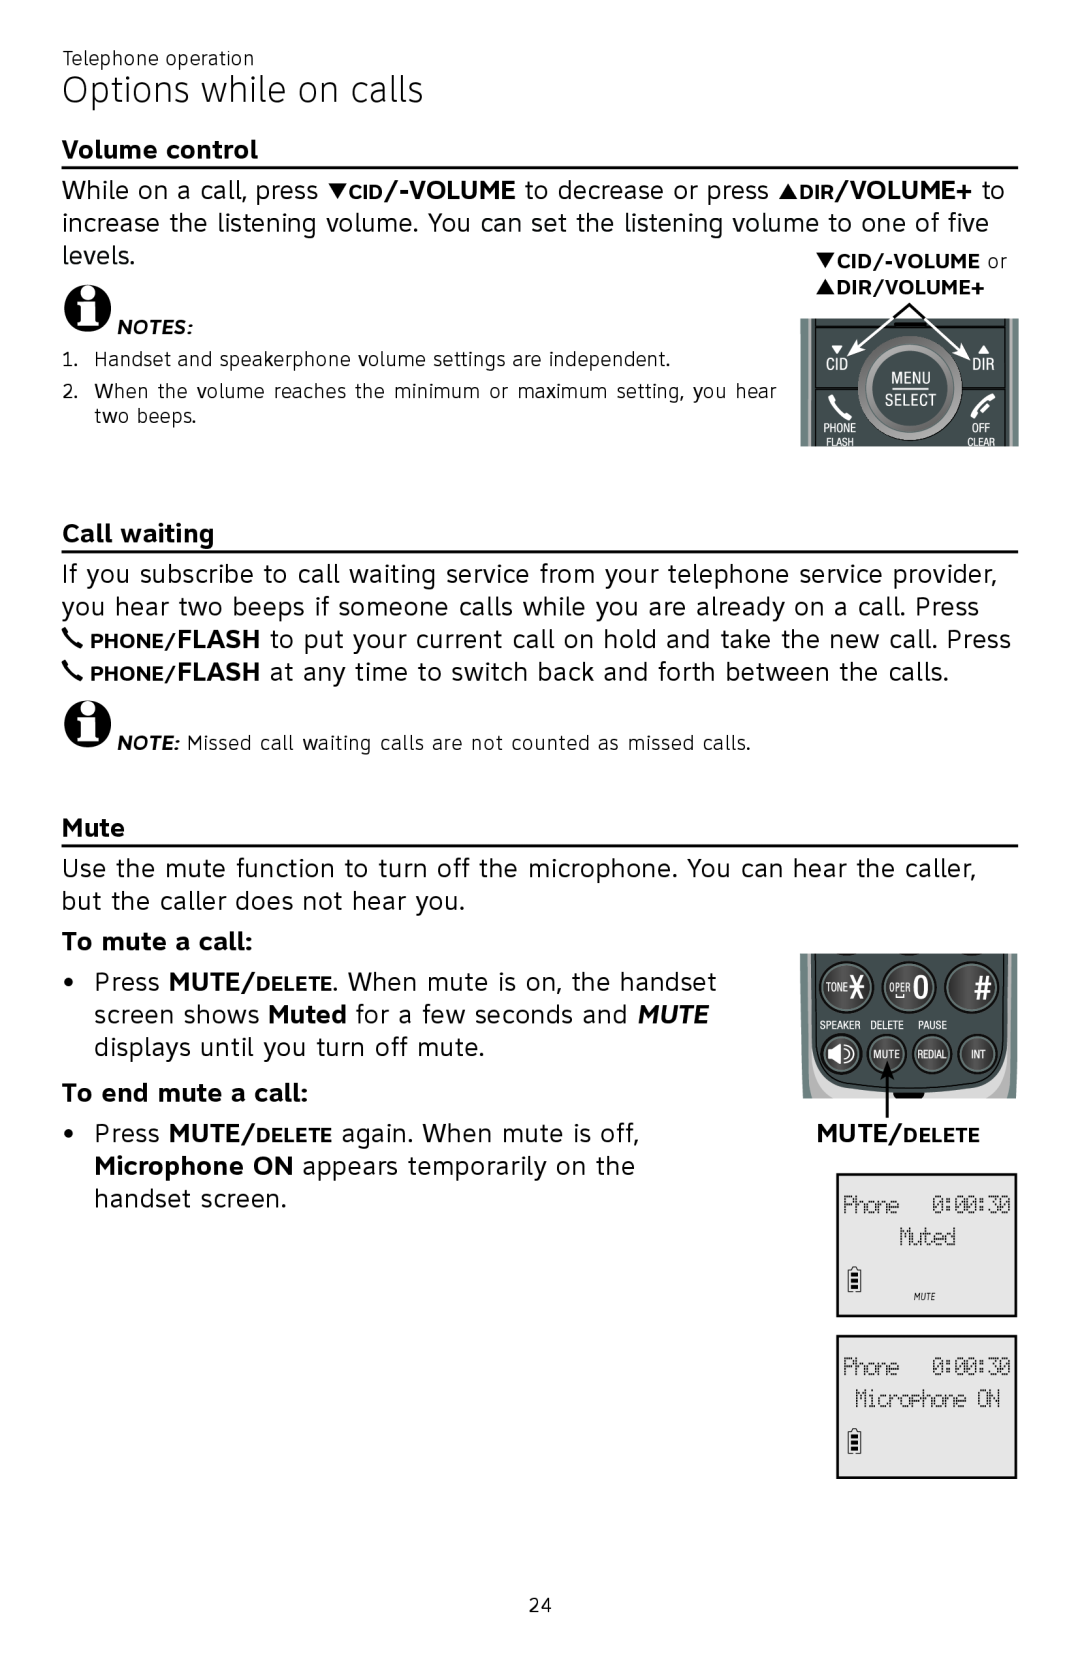 AT&T CL82450 user manual Options while on calls, Volume control, Call waiting, Mute, To mute a call, To end mute a call 